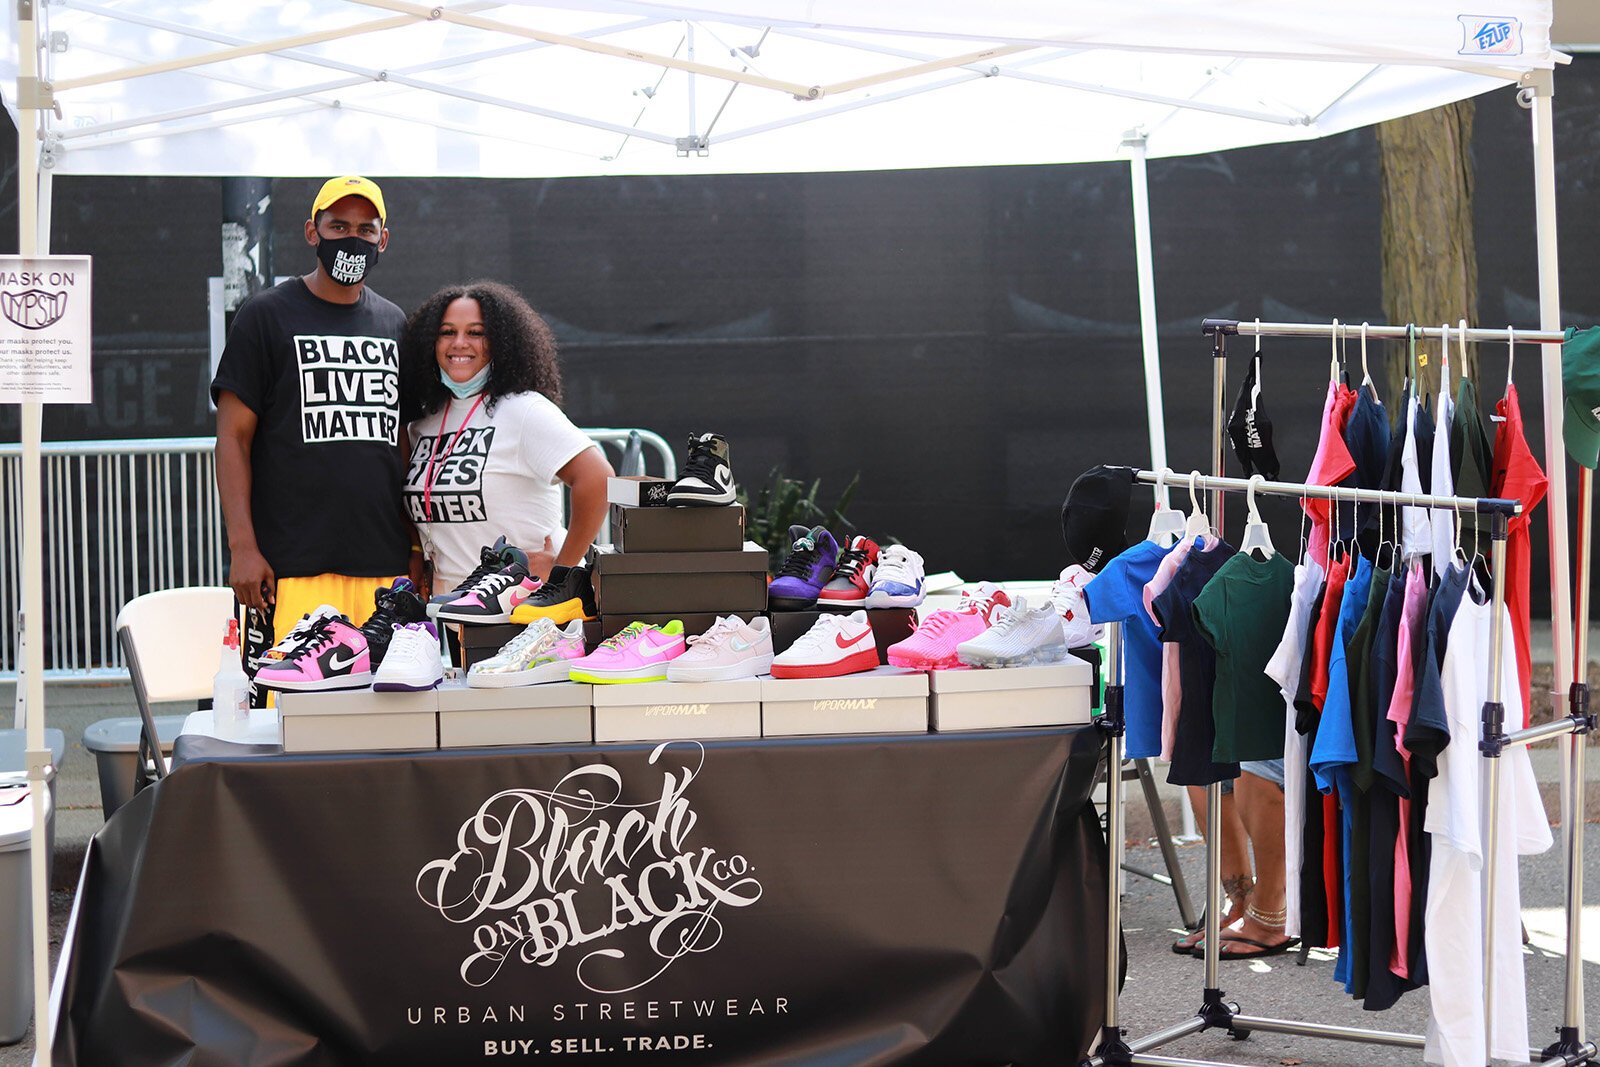 New Ypsilanti pop-up markets help micro-business owners survive COVID-19